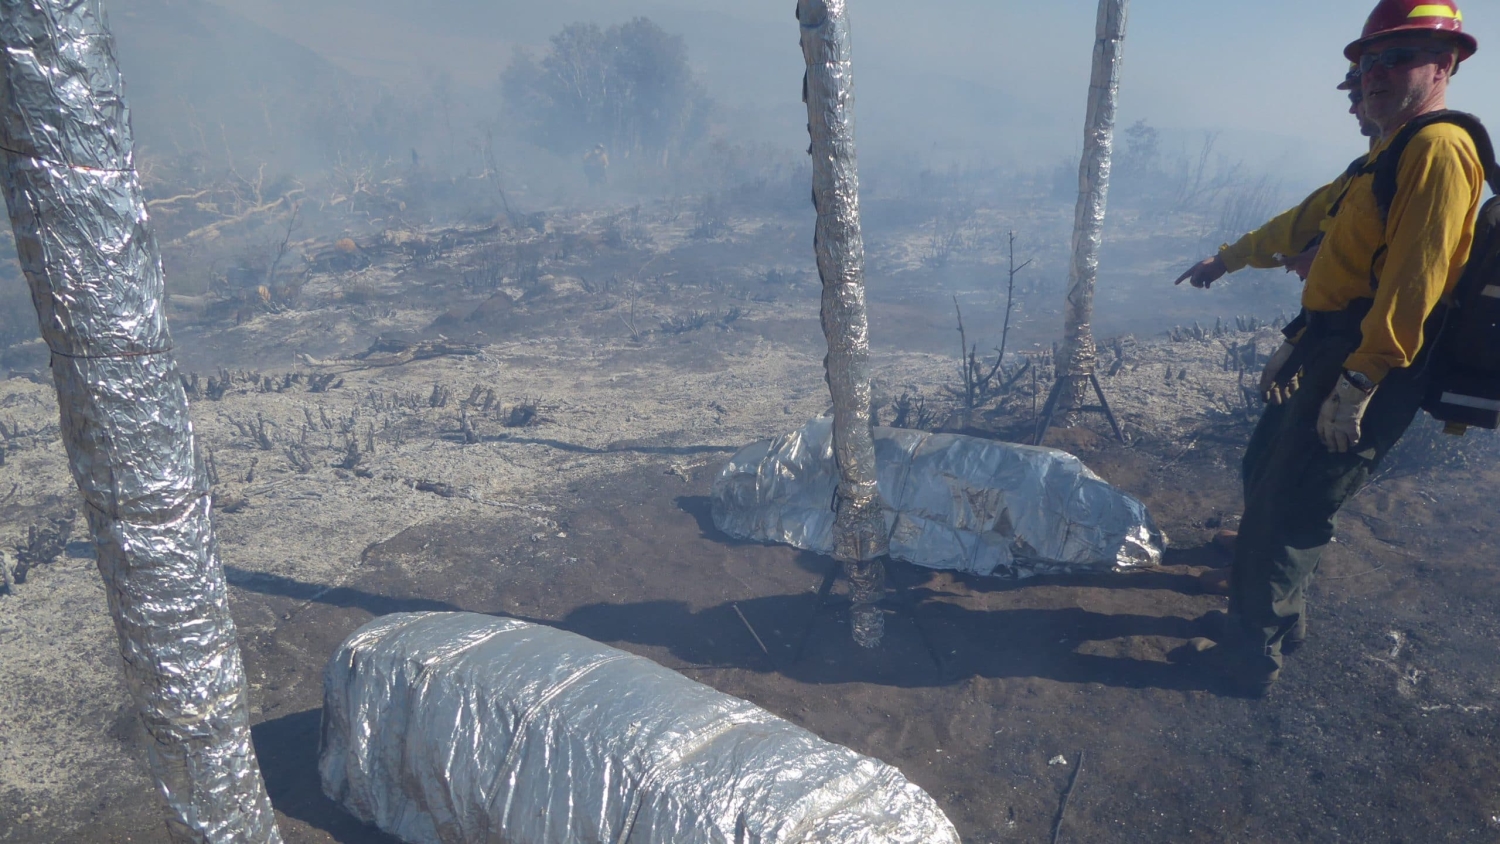 A firefighter points at a fire shelter - New Fire Shelter Prototypes Could Buy Time for Wildfire Firefighters - College of Natural Resources News NC State University